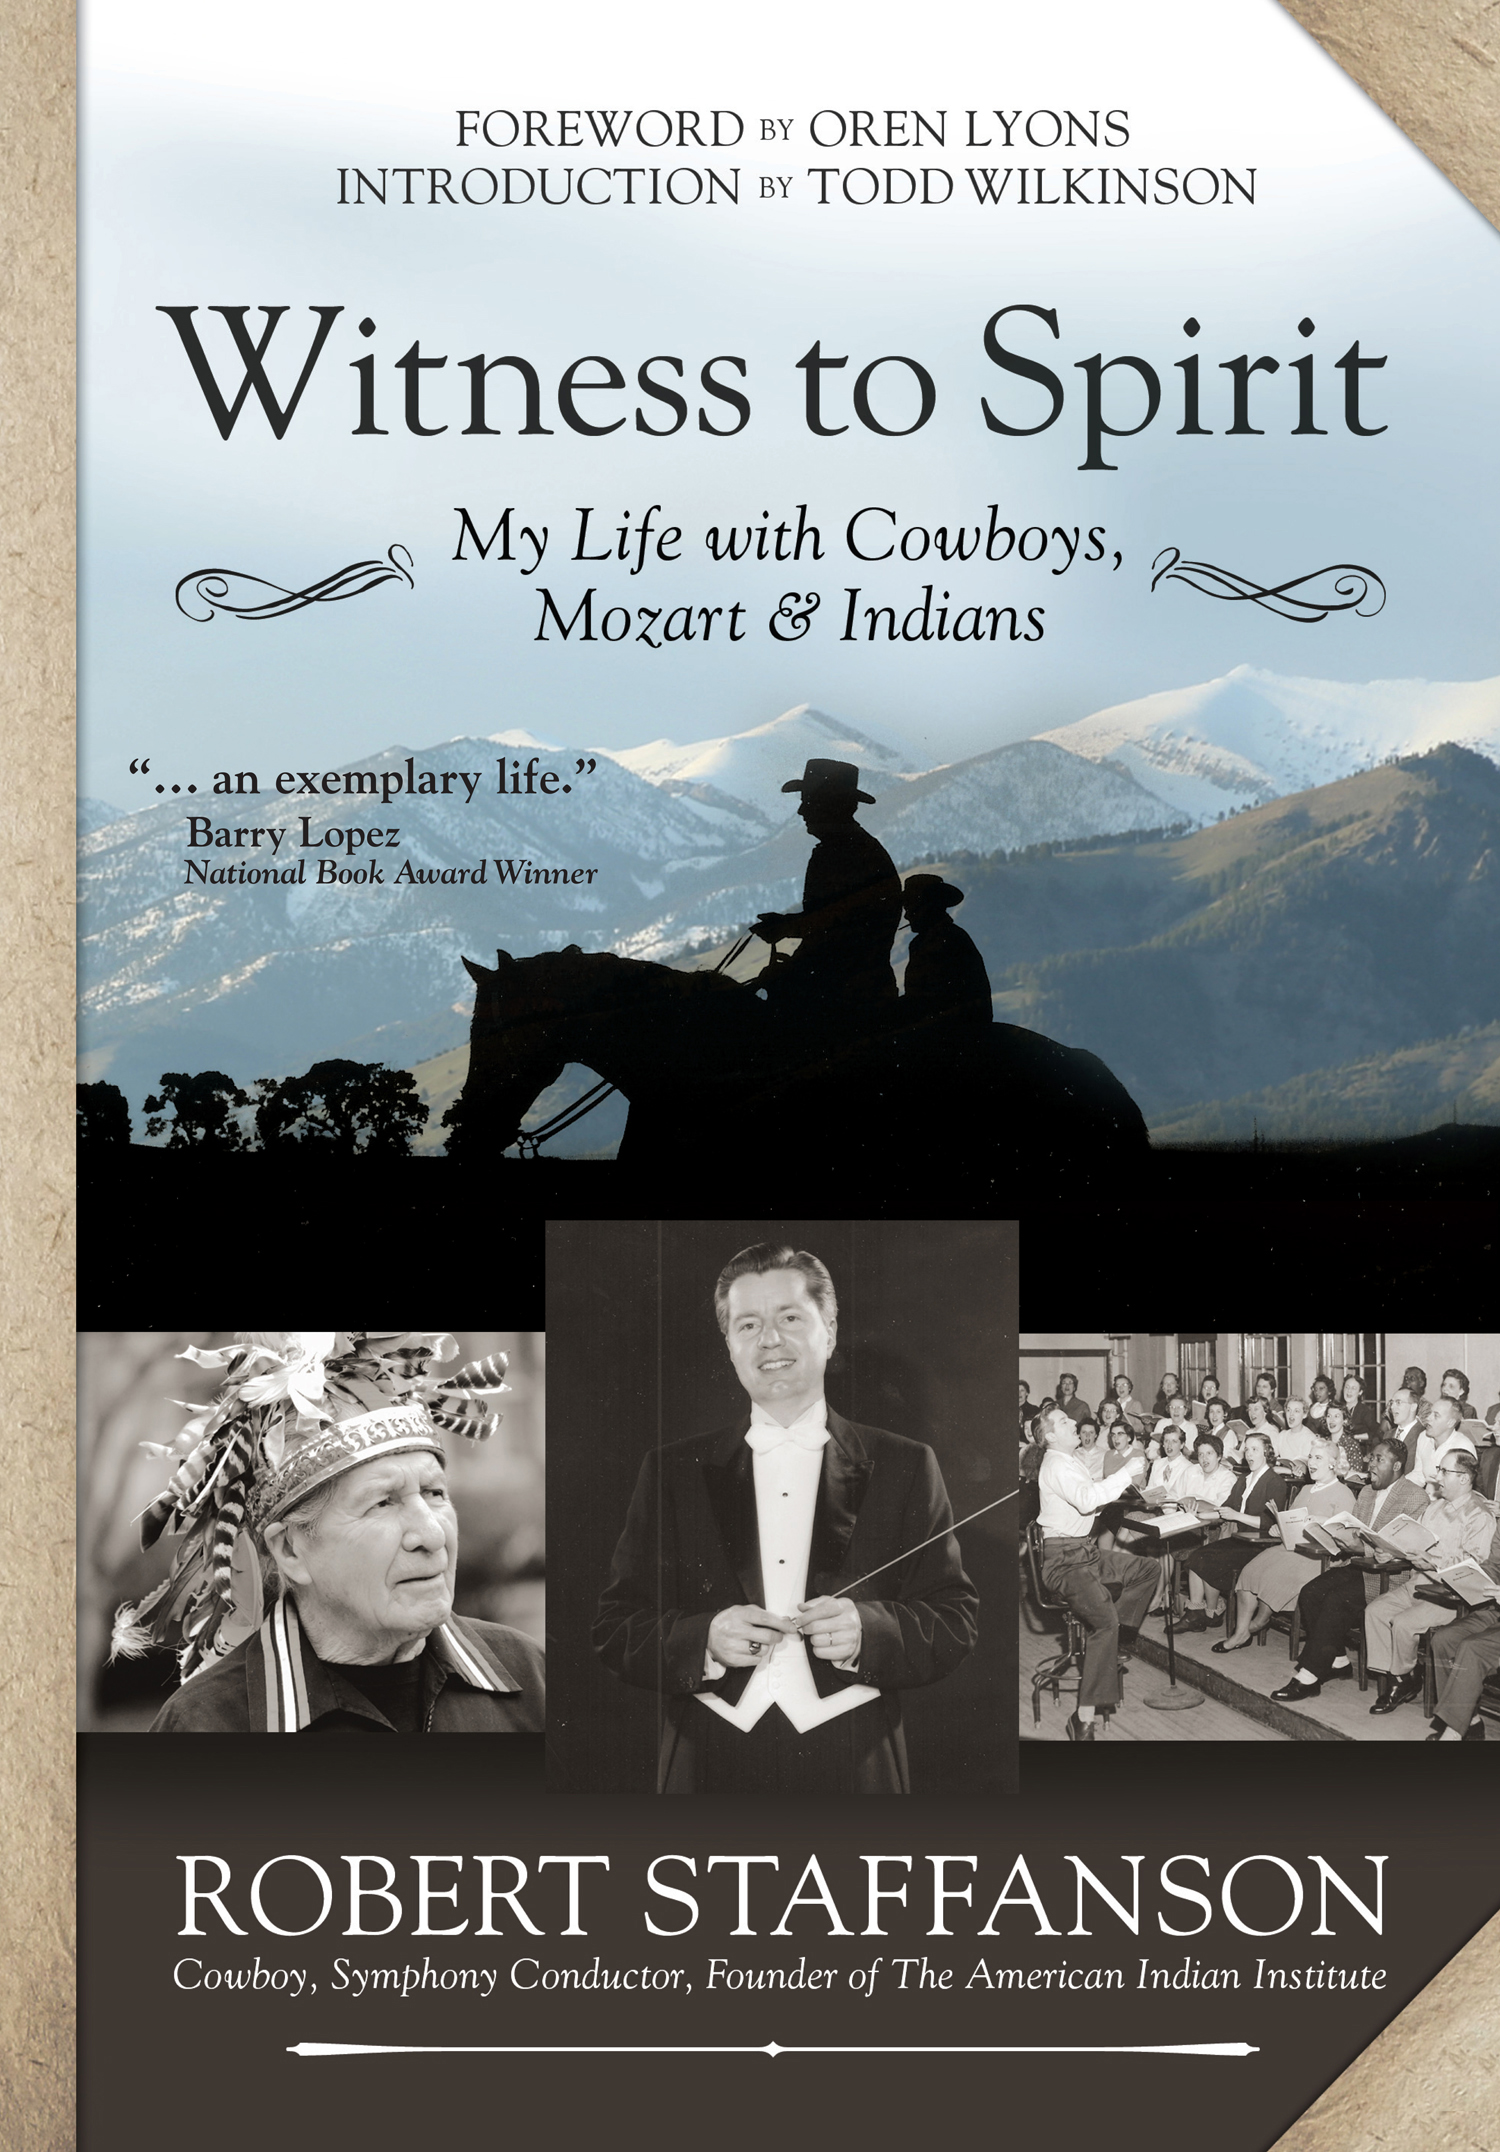 Witness to Spirit: My Life with Cowboys, Mozart & Indians by Robert Staffanson